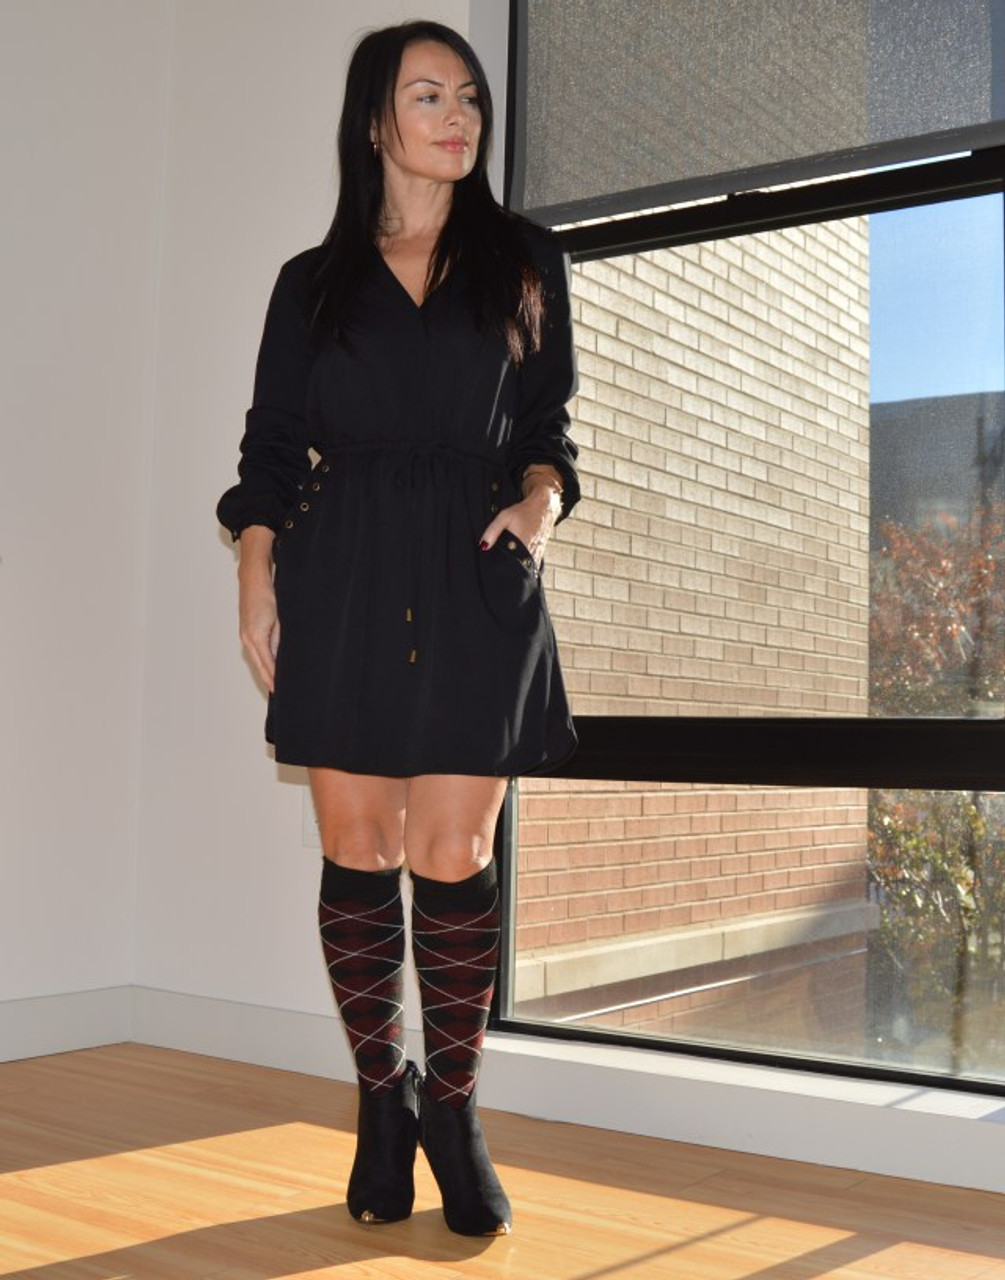 Stylish outfit with black dress and maroon tartan socks